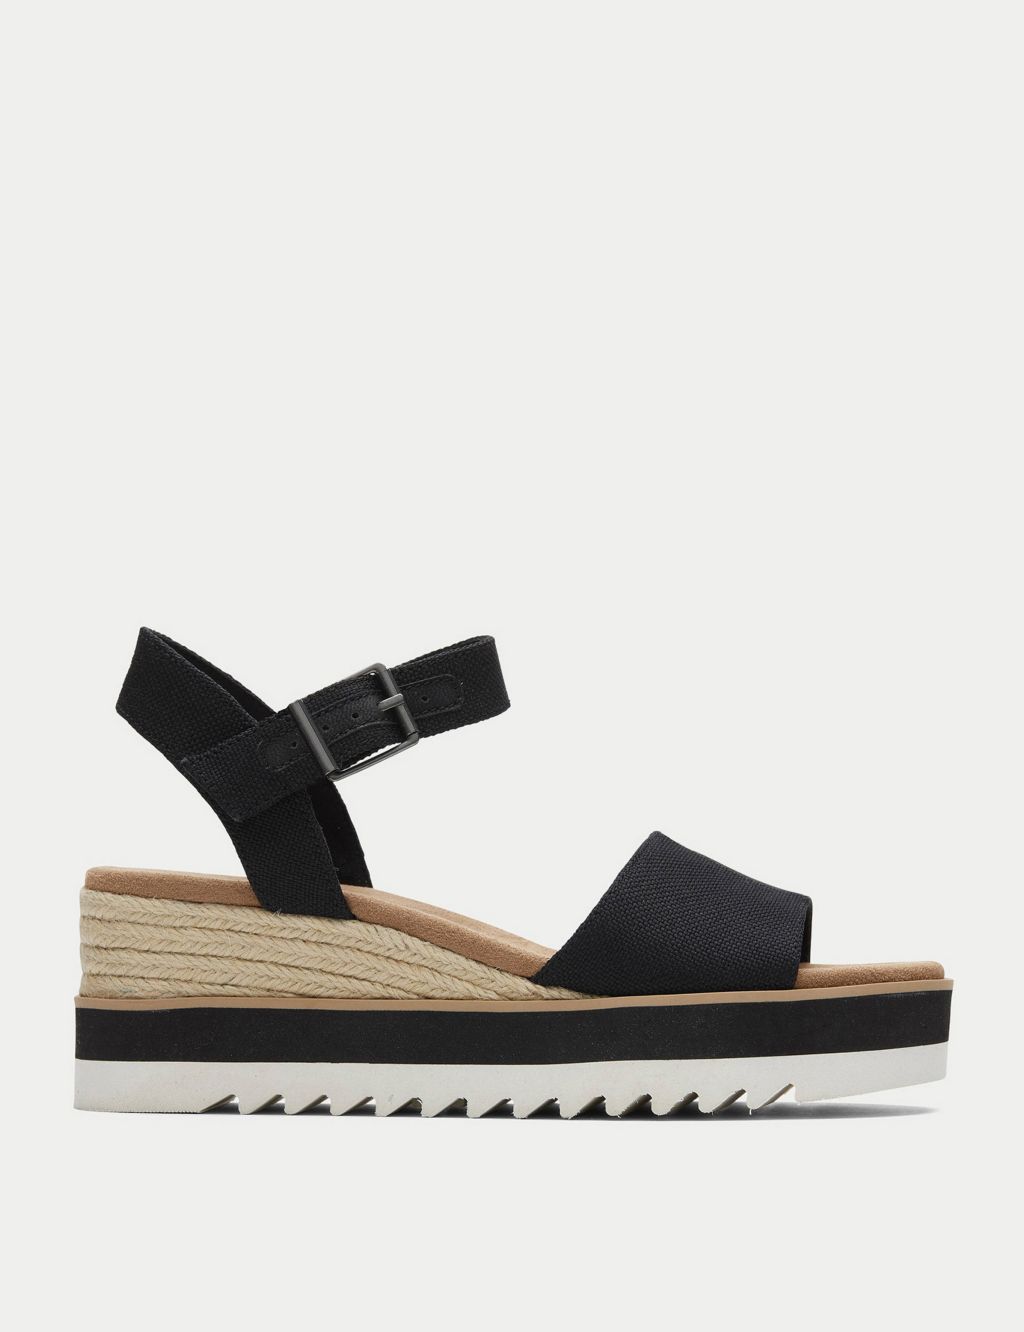 Canvas Buckle Ankle Strap Wedge Espadrilles image 1